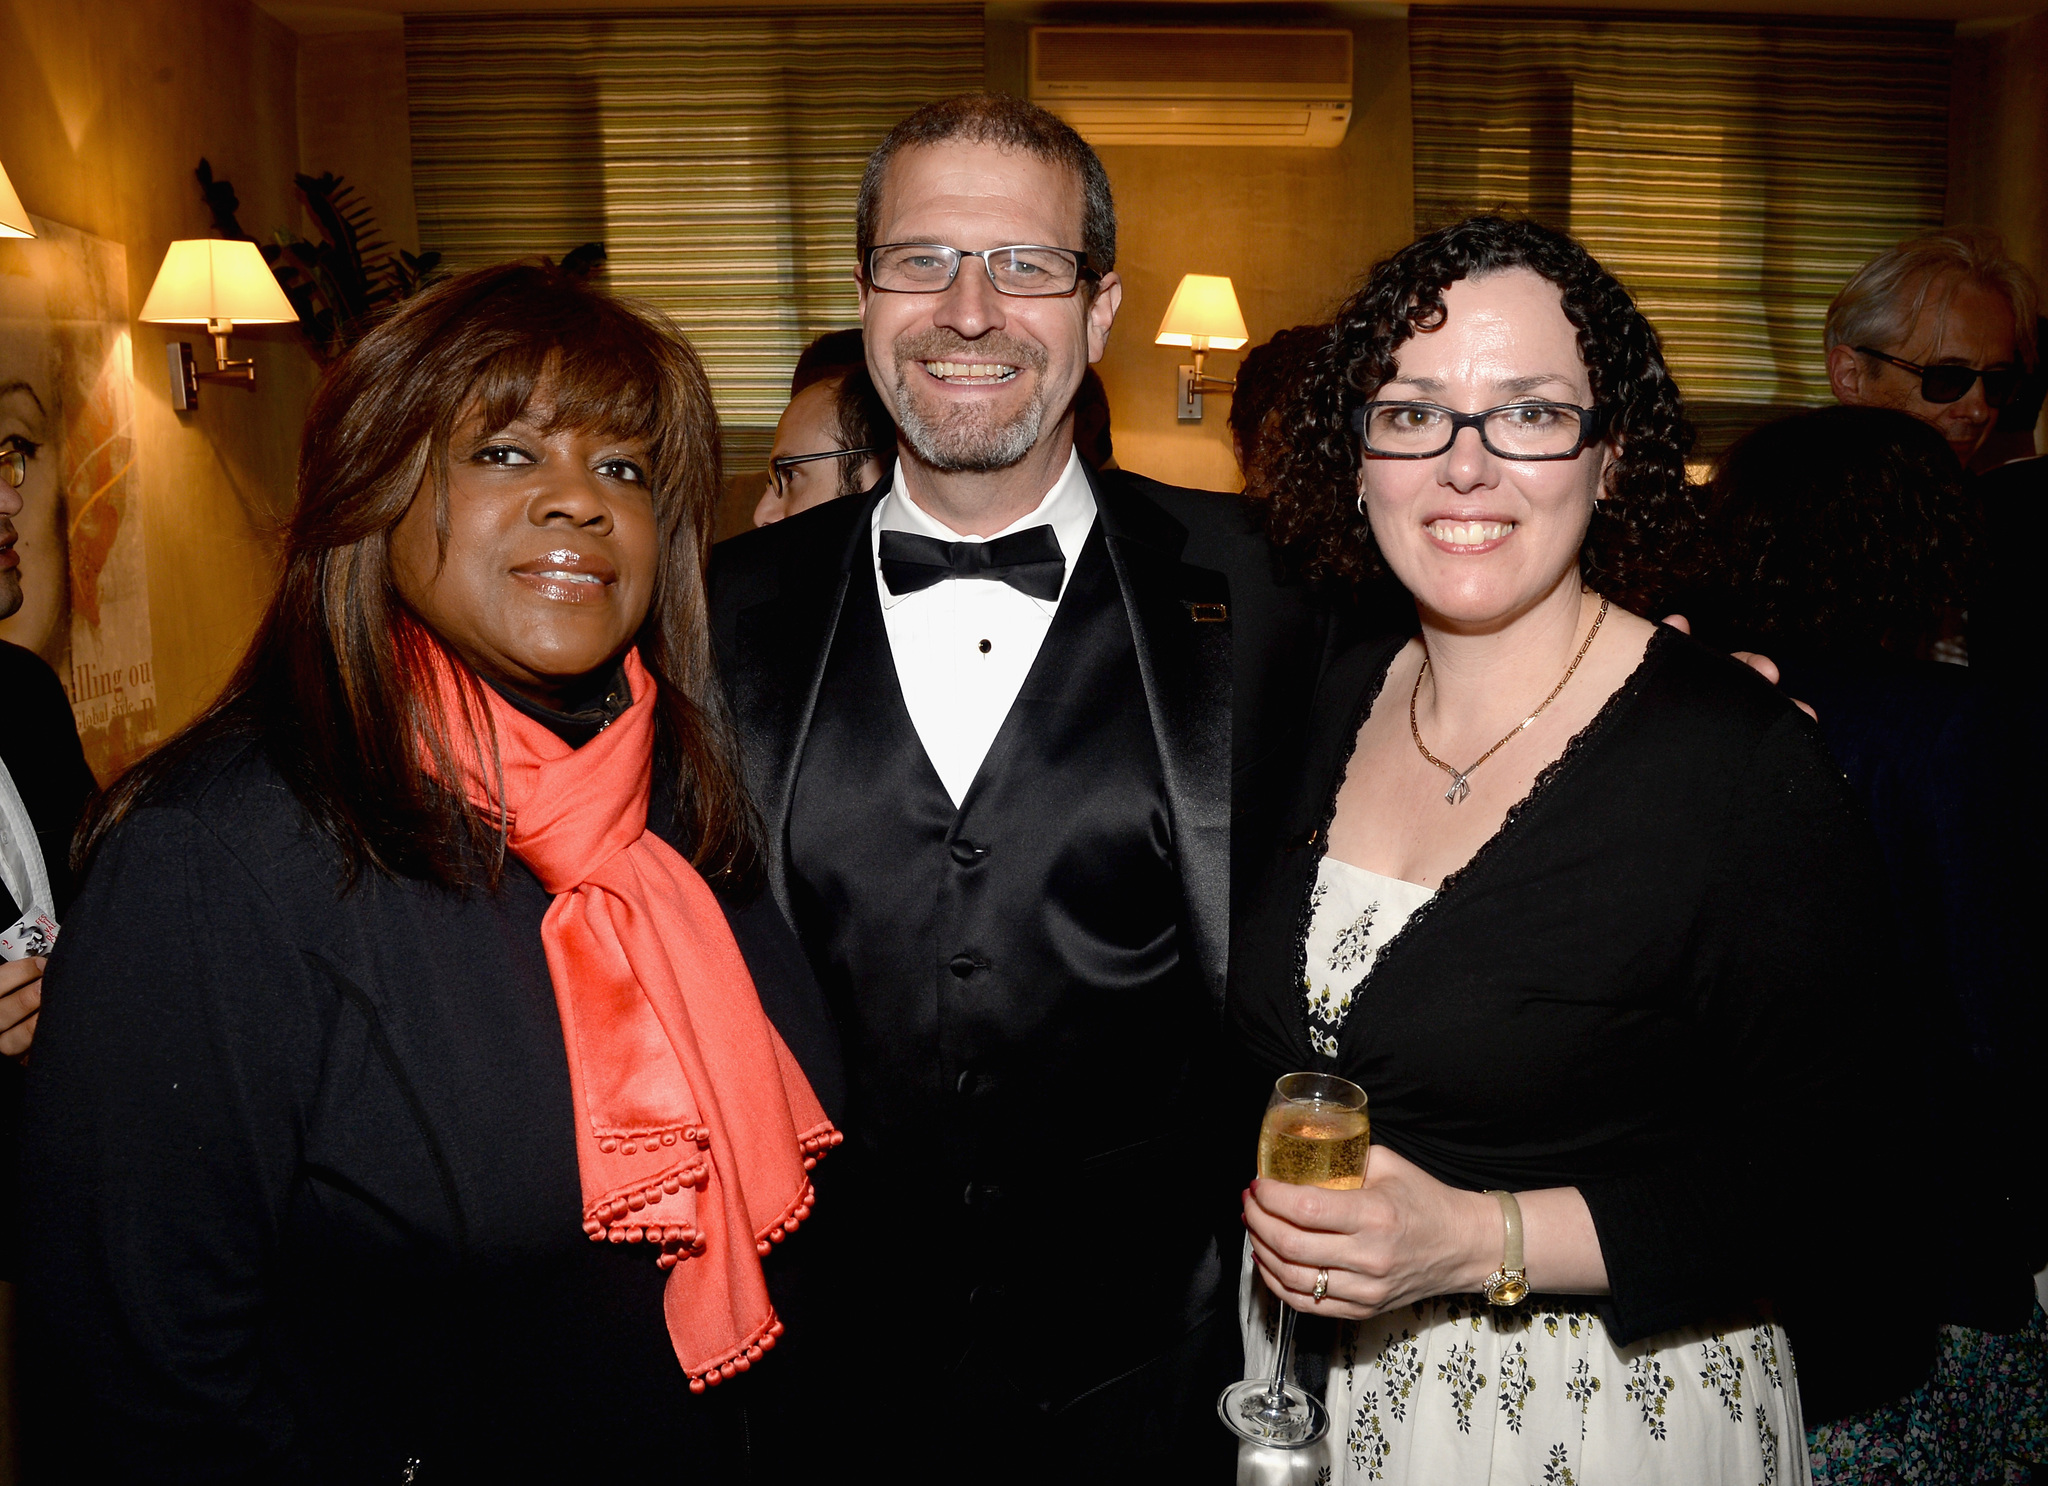 Chaz Ebert, IMDb's Keith Simanton and Karen Needham attend the IMDB's 2013 Cannes Film Festival Dinner Party during the 66th Annual Cannes Film Festival at Restaurant Mantel on May 20, 2013 in Cannes, France.